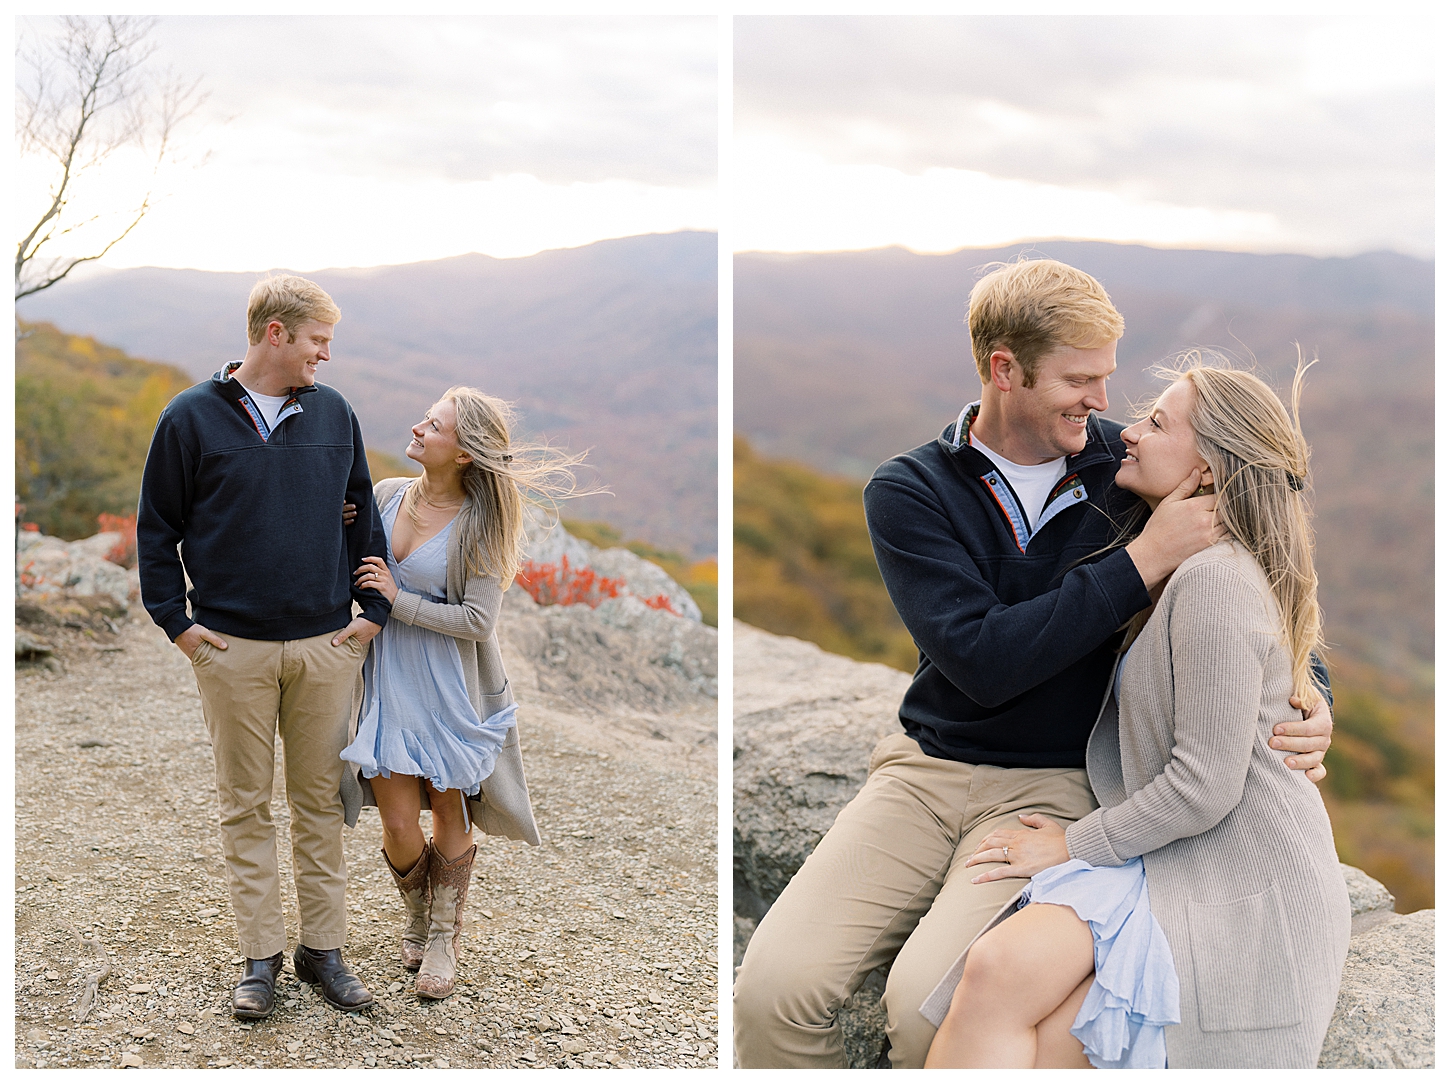 Ravens Roost engagement photos